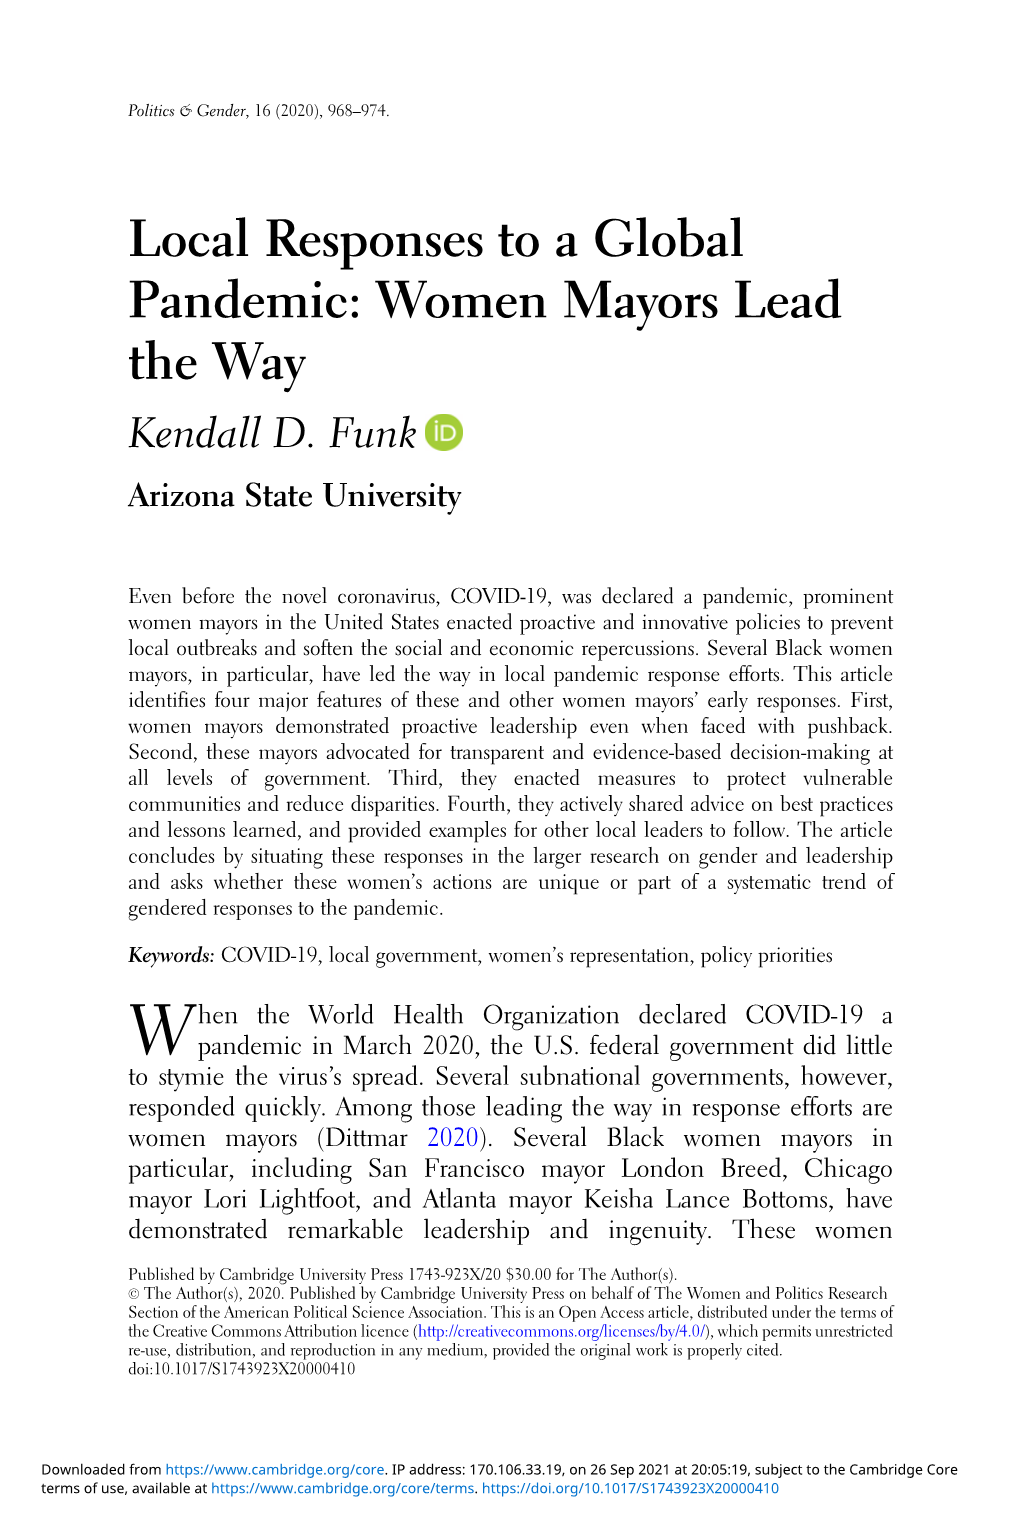 Local Responses to a Global Pandemic: Women Mayors Lead the Way Kendall D